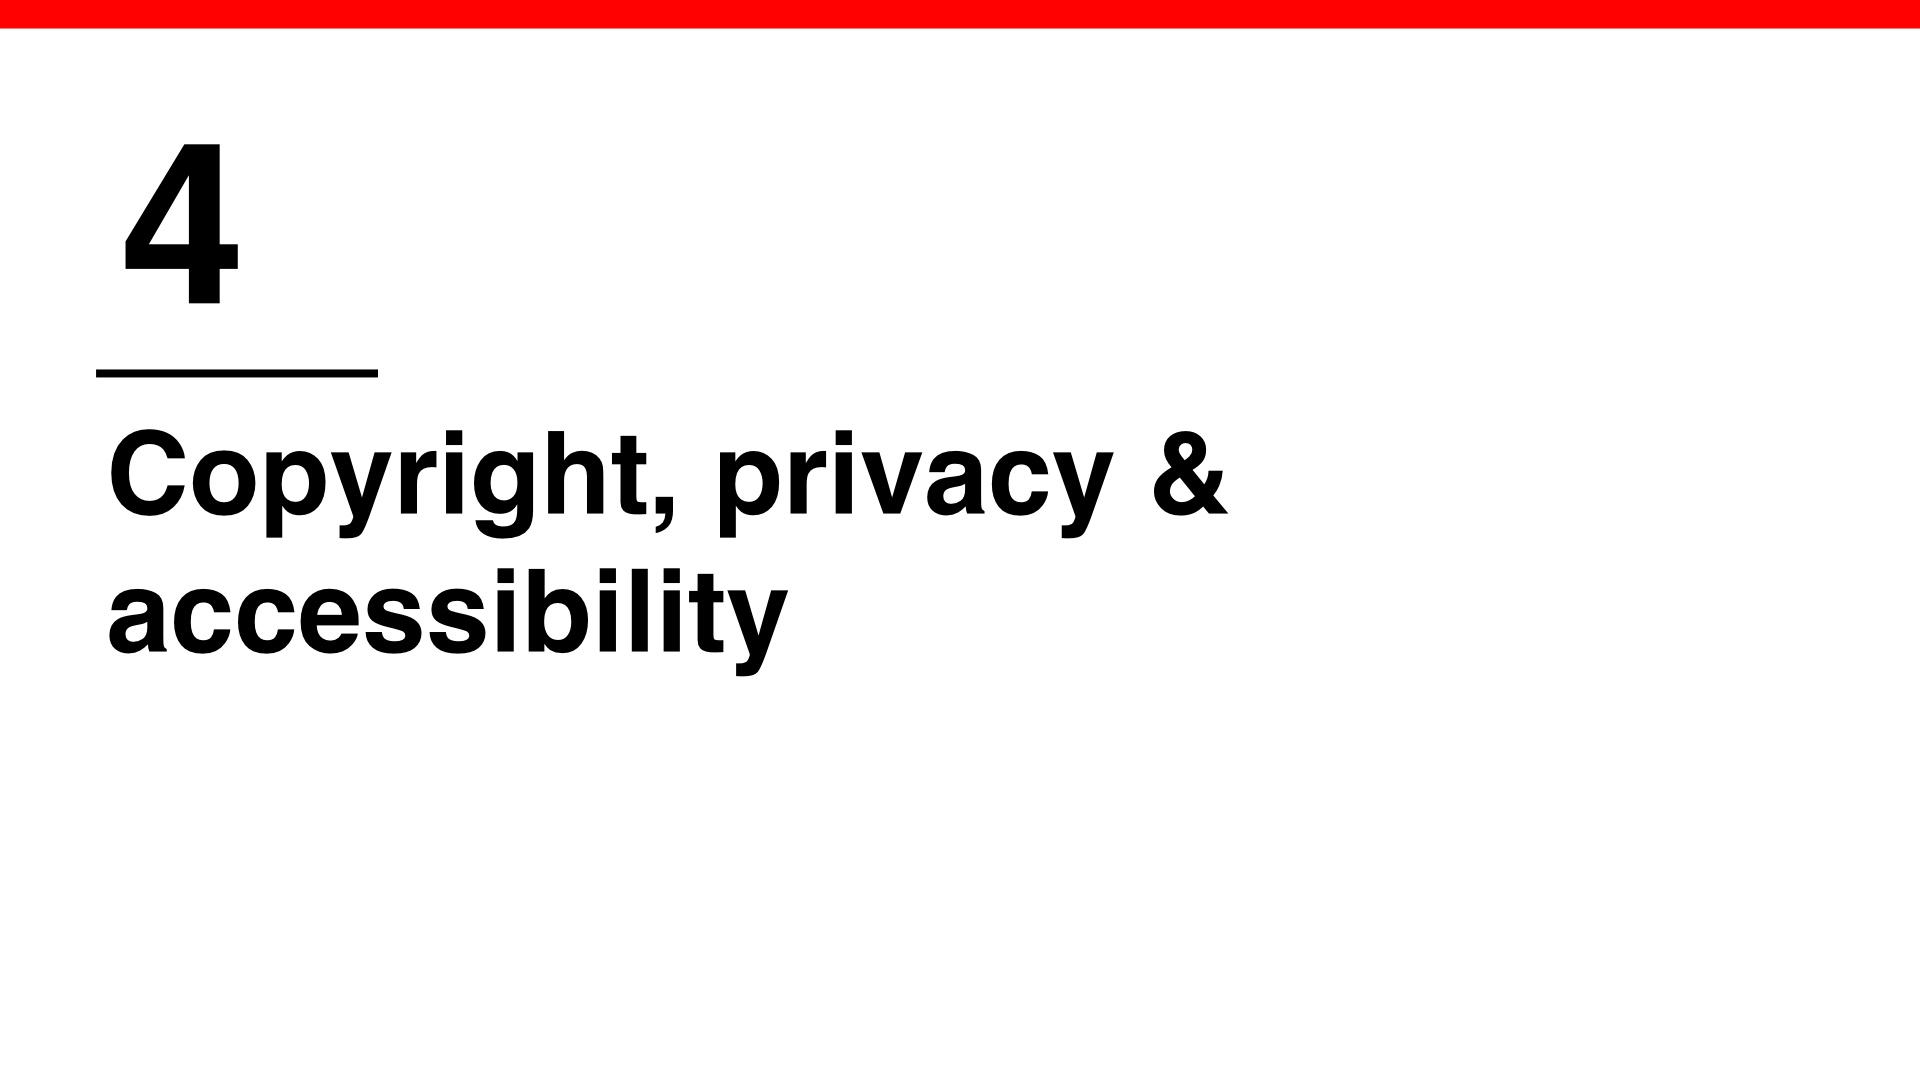 Section 4: Copyright, privacy & accessibility